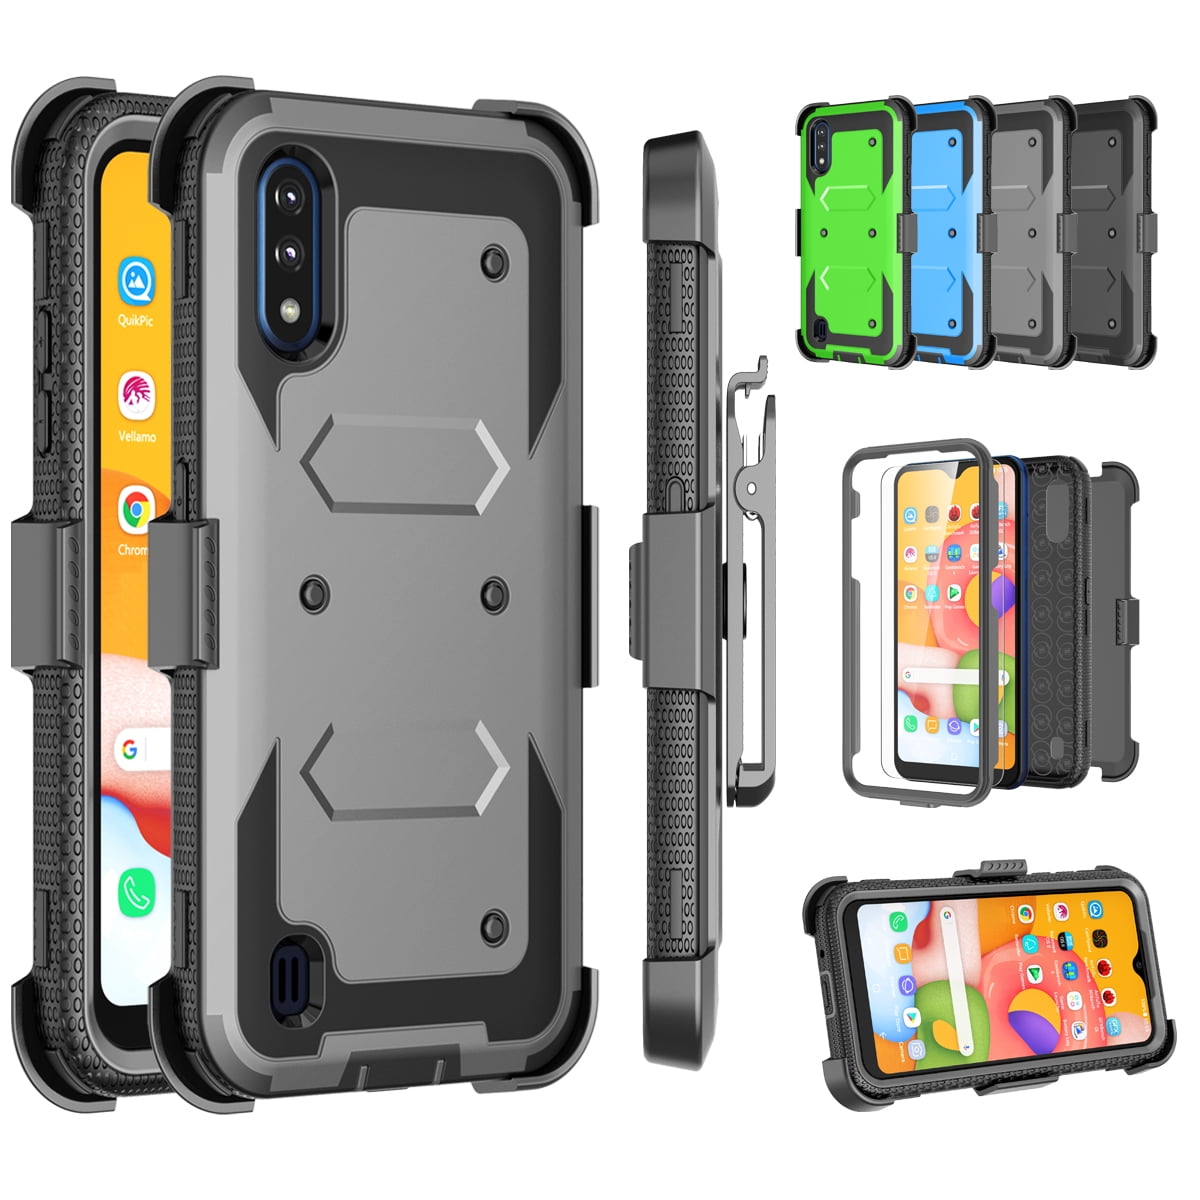 6.1” | Protective/Fit for iPhone 12 Pro/iPhone 12 Compatible with Otterbox Defender Series Case WallSkiN “2 PCS” Replacement Belt Clip Holster 